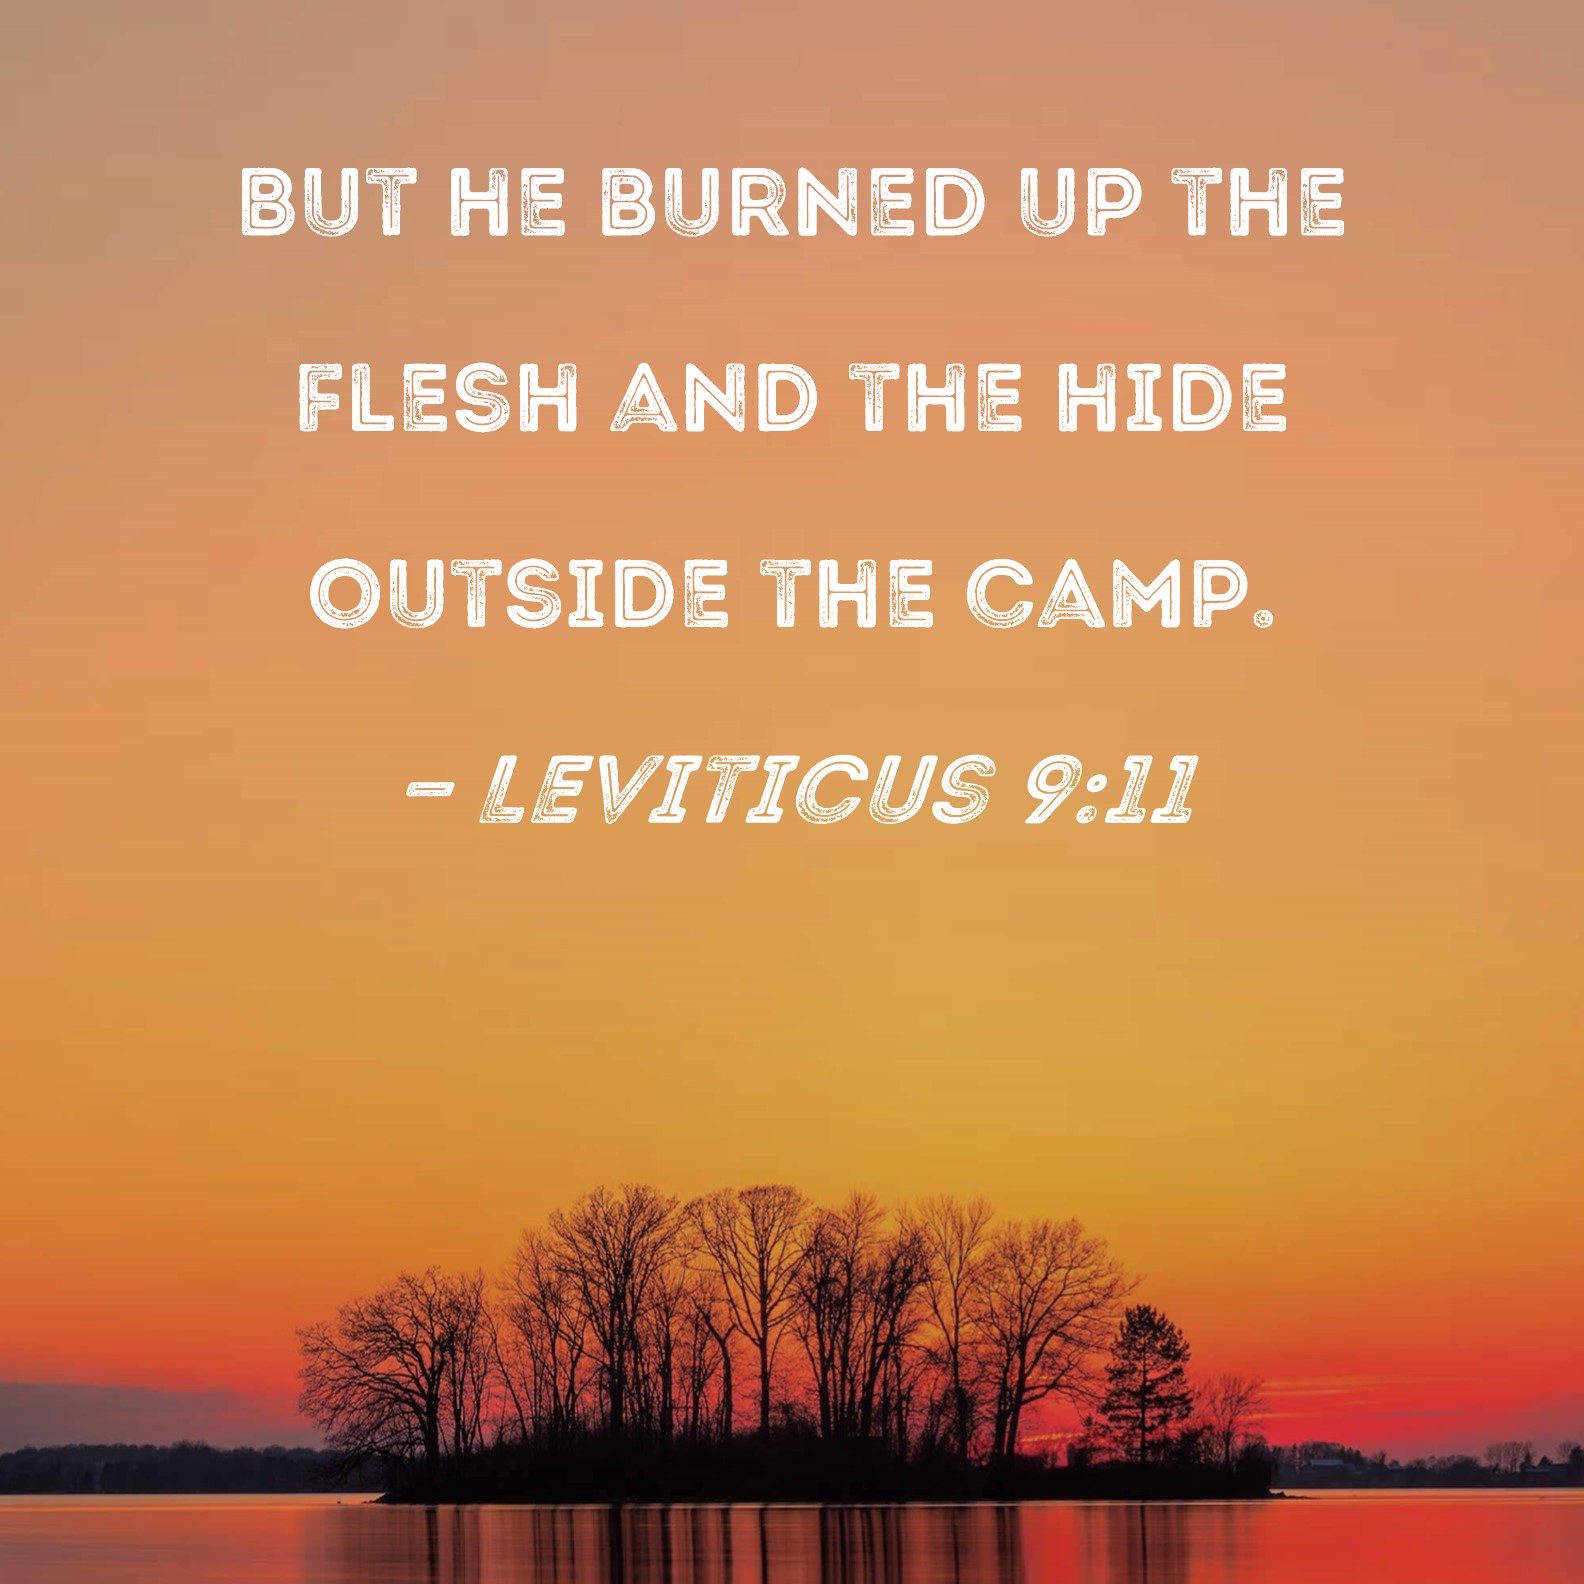 Leviticus 9:11 But he burned up the flesh and the hide outside the camp.